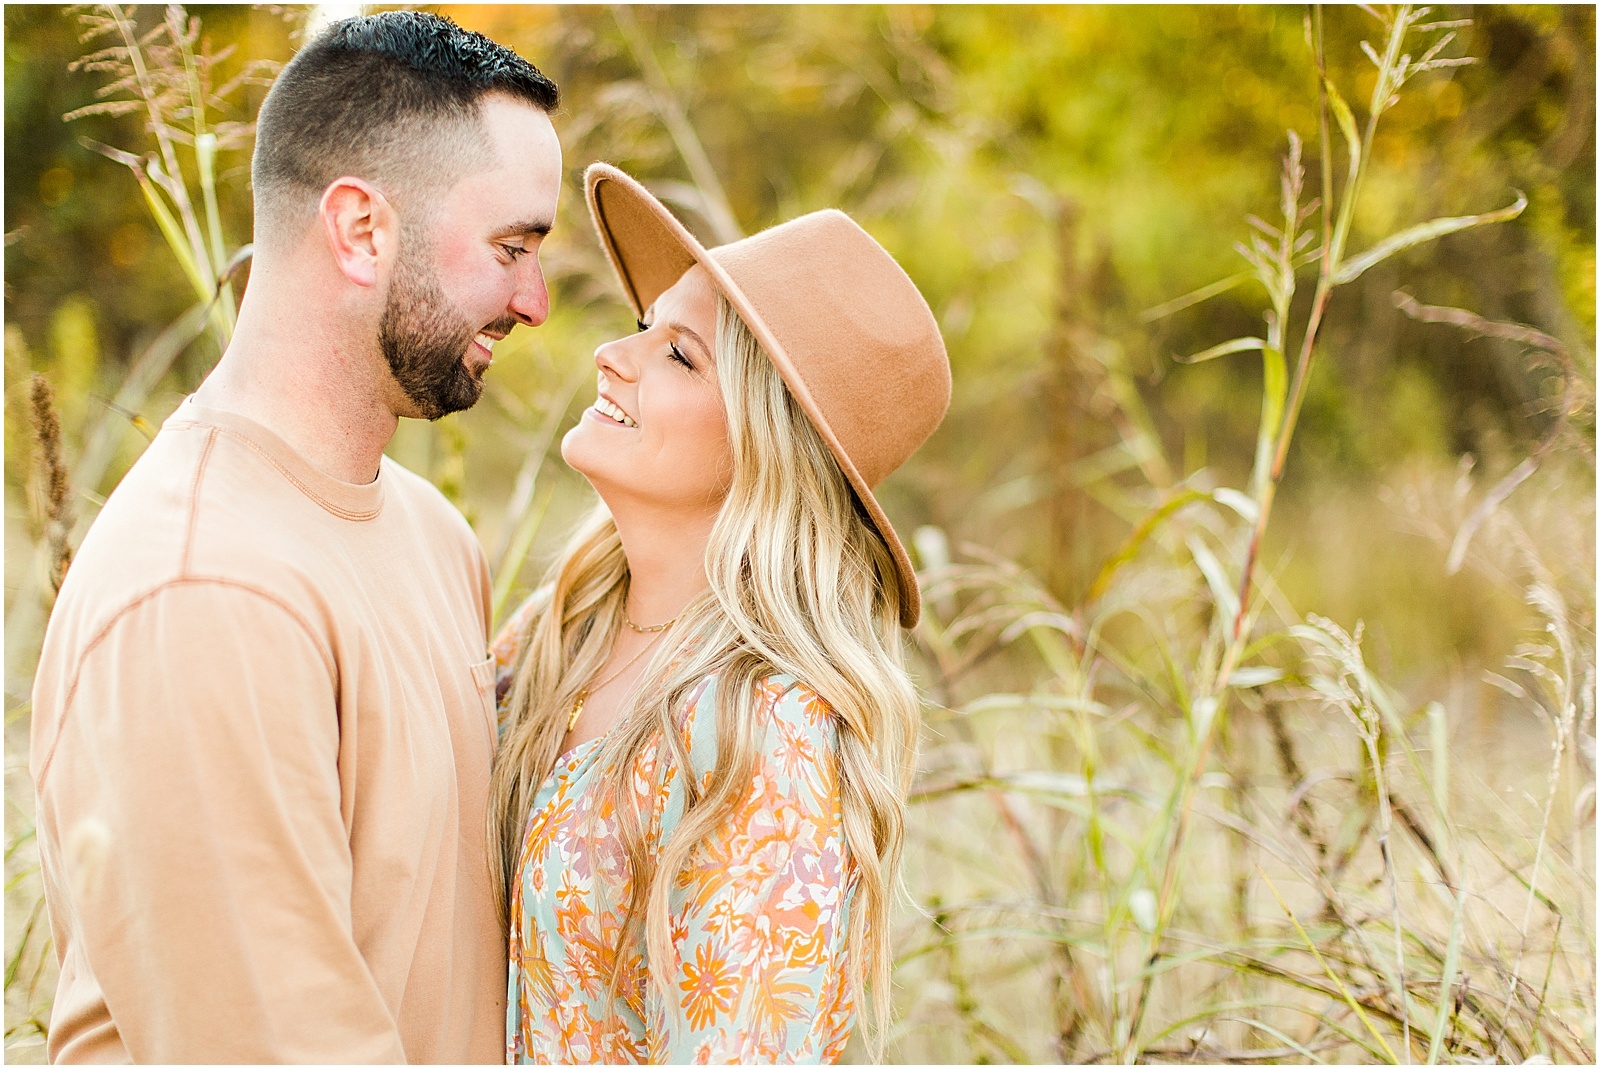 A Southern Indiana Engagement Session | Charleston and Erin | Bret and Brandie Photography016.jpg